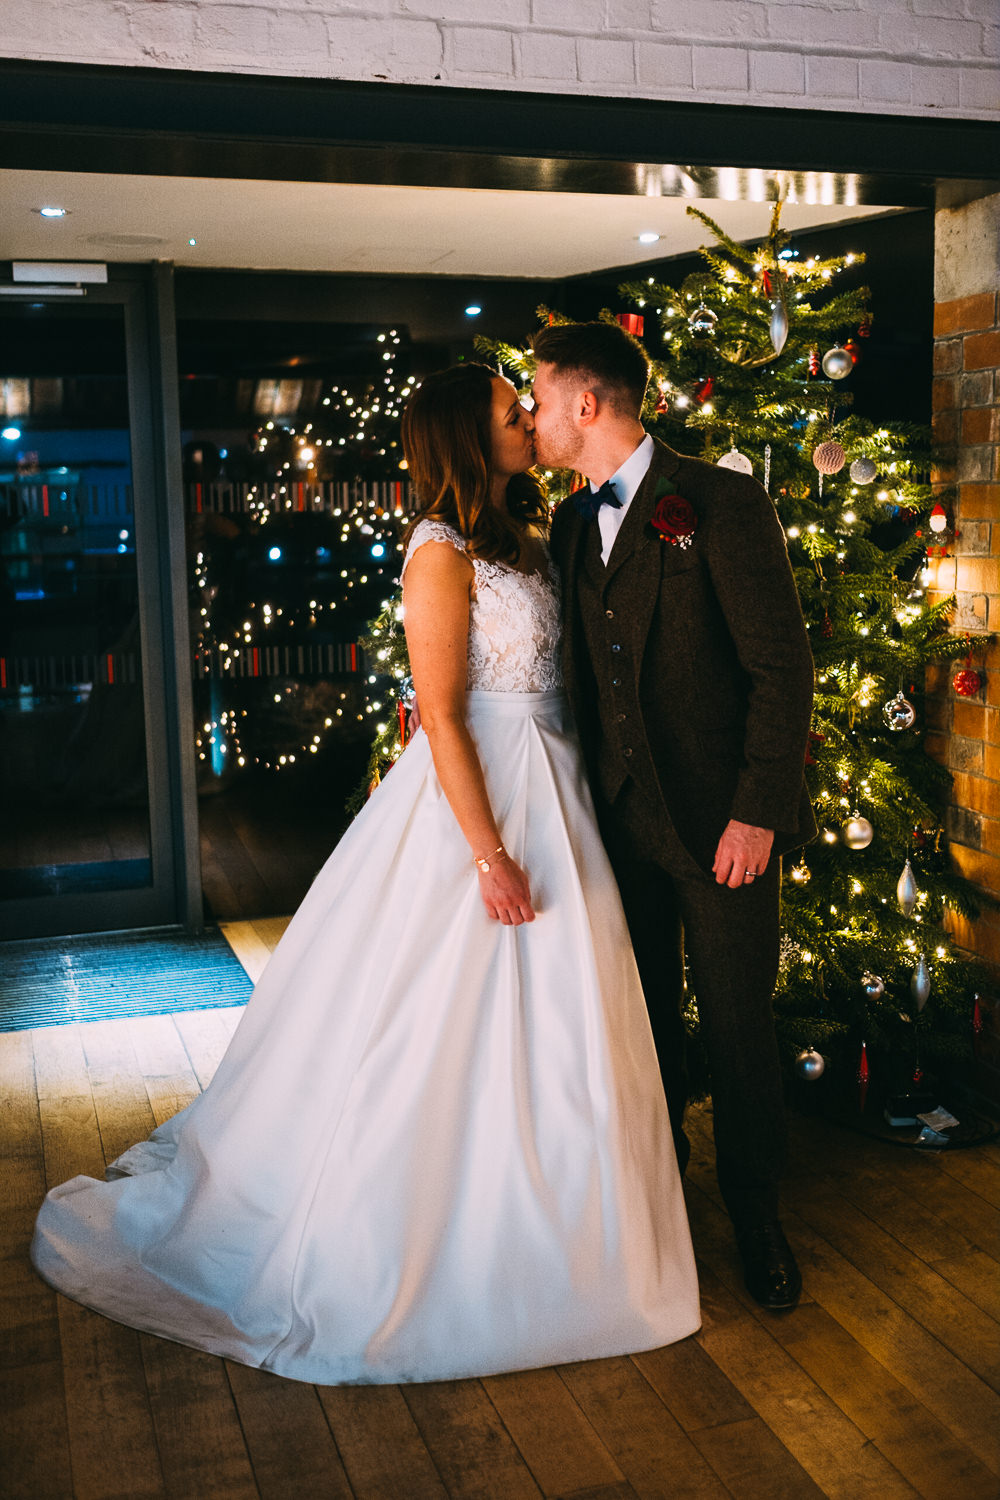 003 BRIDE AND GROOM ROMANTIC MOMENT IN FRONT OF CHRISTMAS TREE WEDDING PHOTOGRAPHY SWANSEA NATIONAL WATERFRONT MUSEUM WEDDING